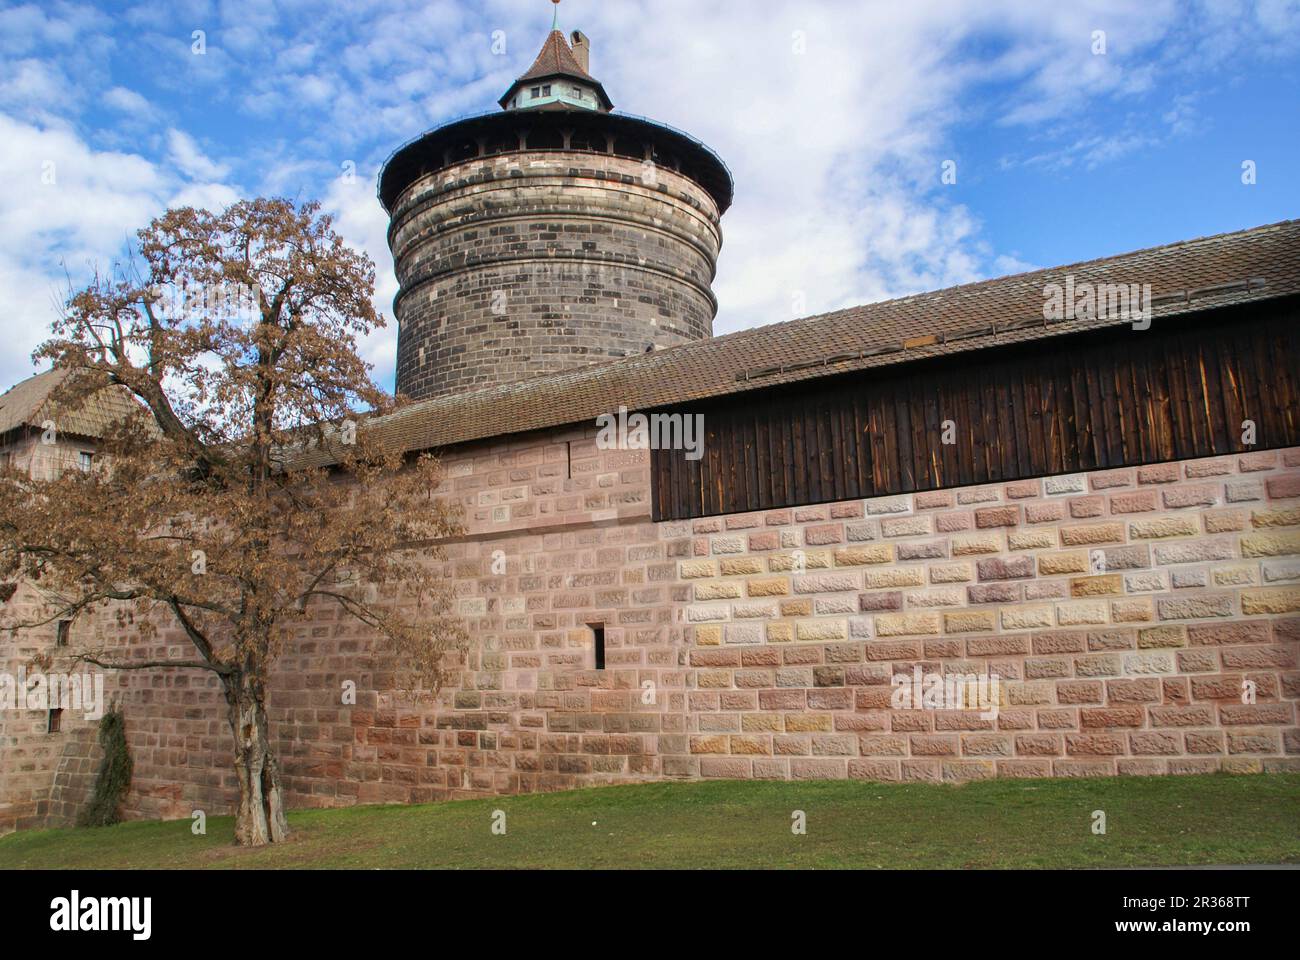 Spittlertor is a historic tower gate in old-town of Nuremberg, Bavaria, Germany Stock Photo